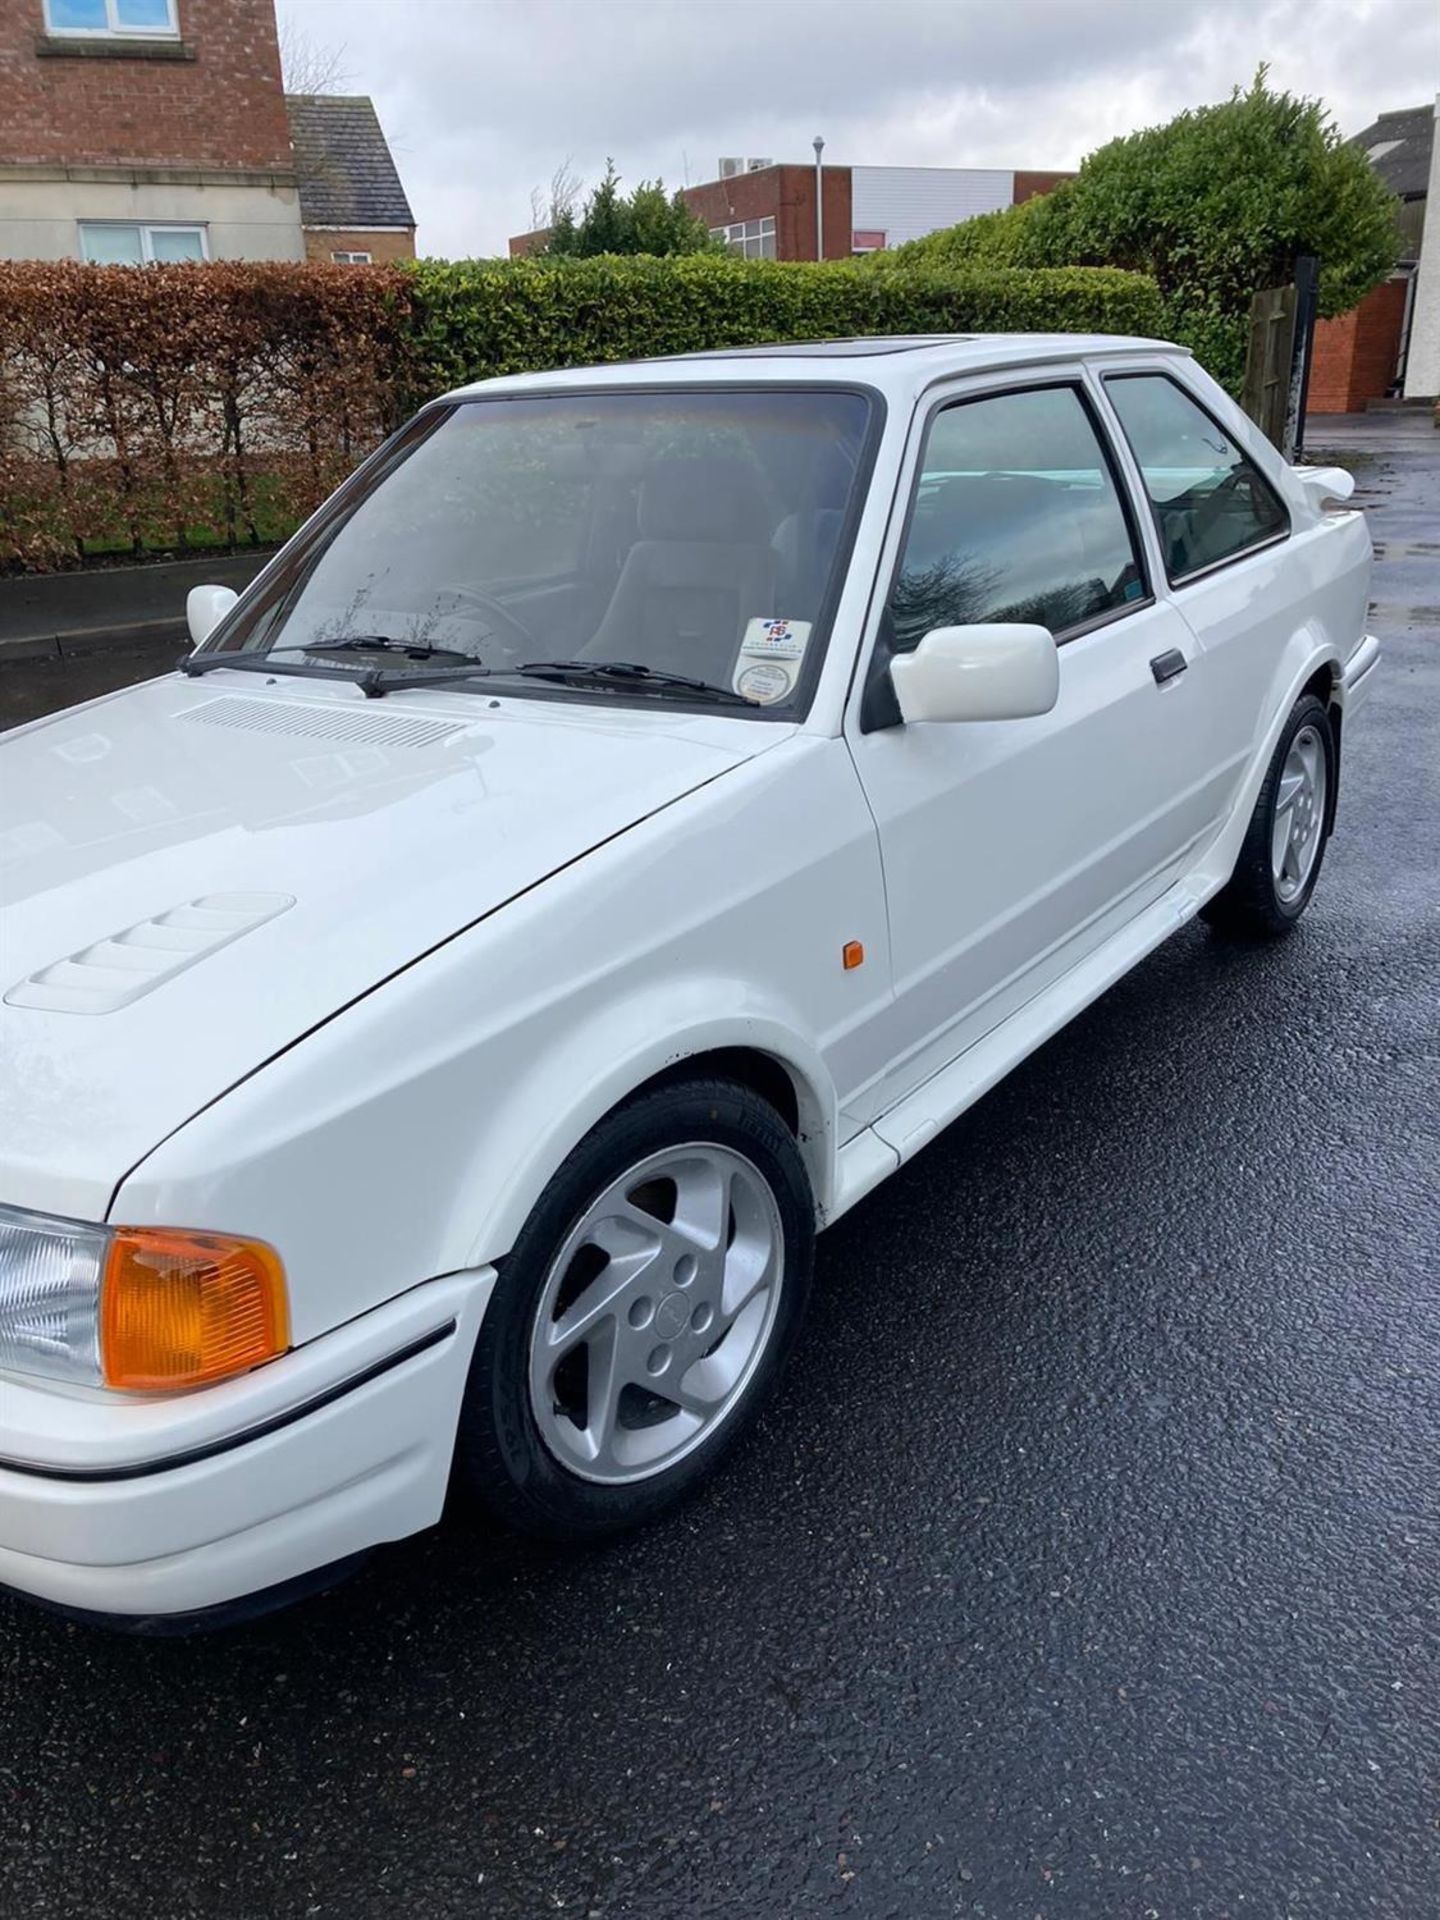 1988 Ford Escort RS Turbo S2 - Image 4 of 5